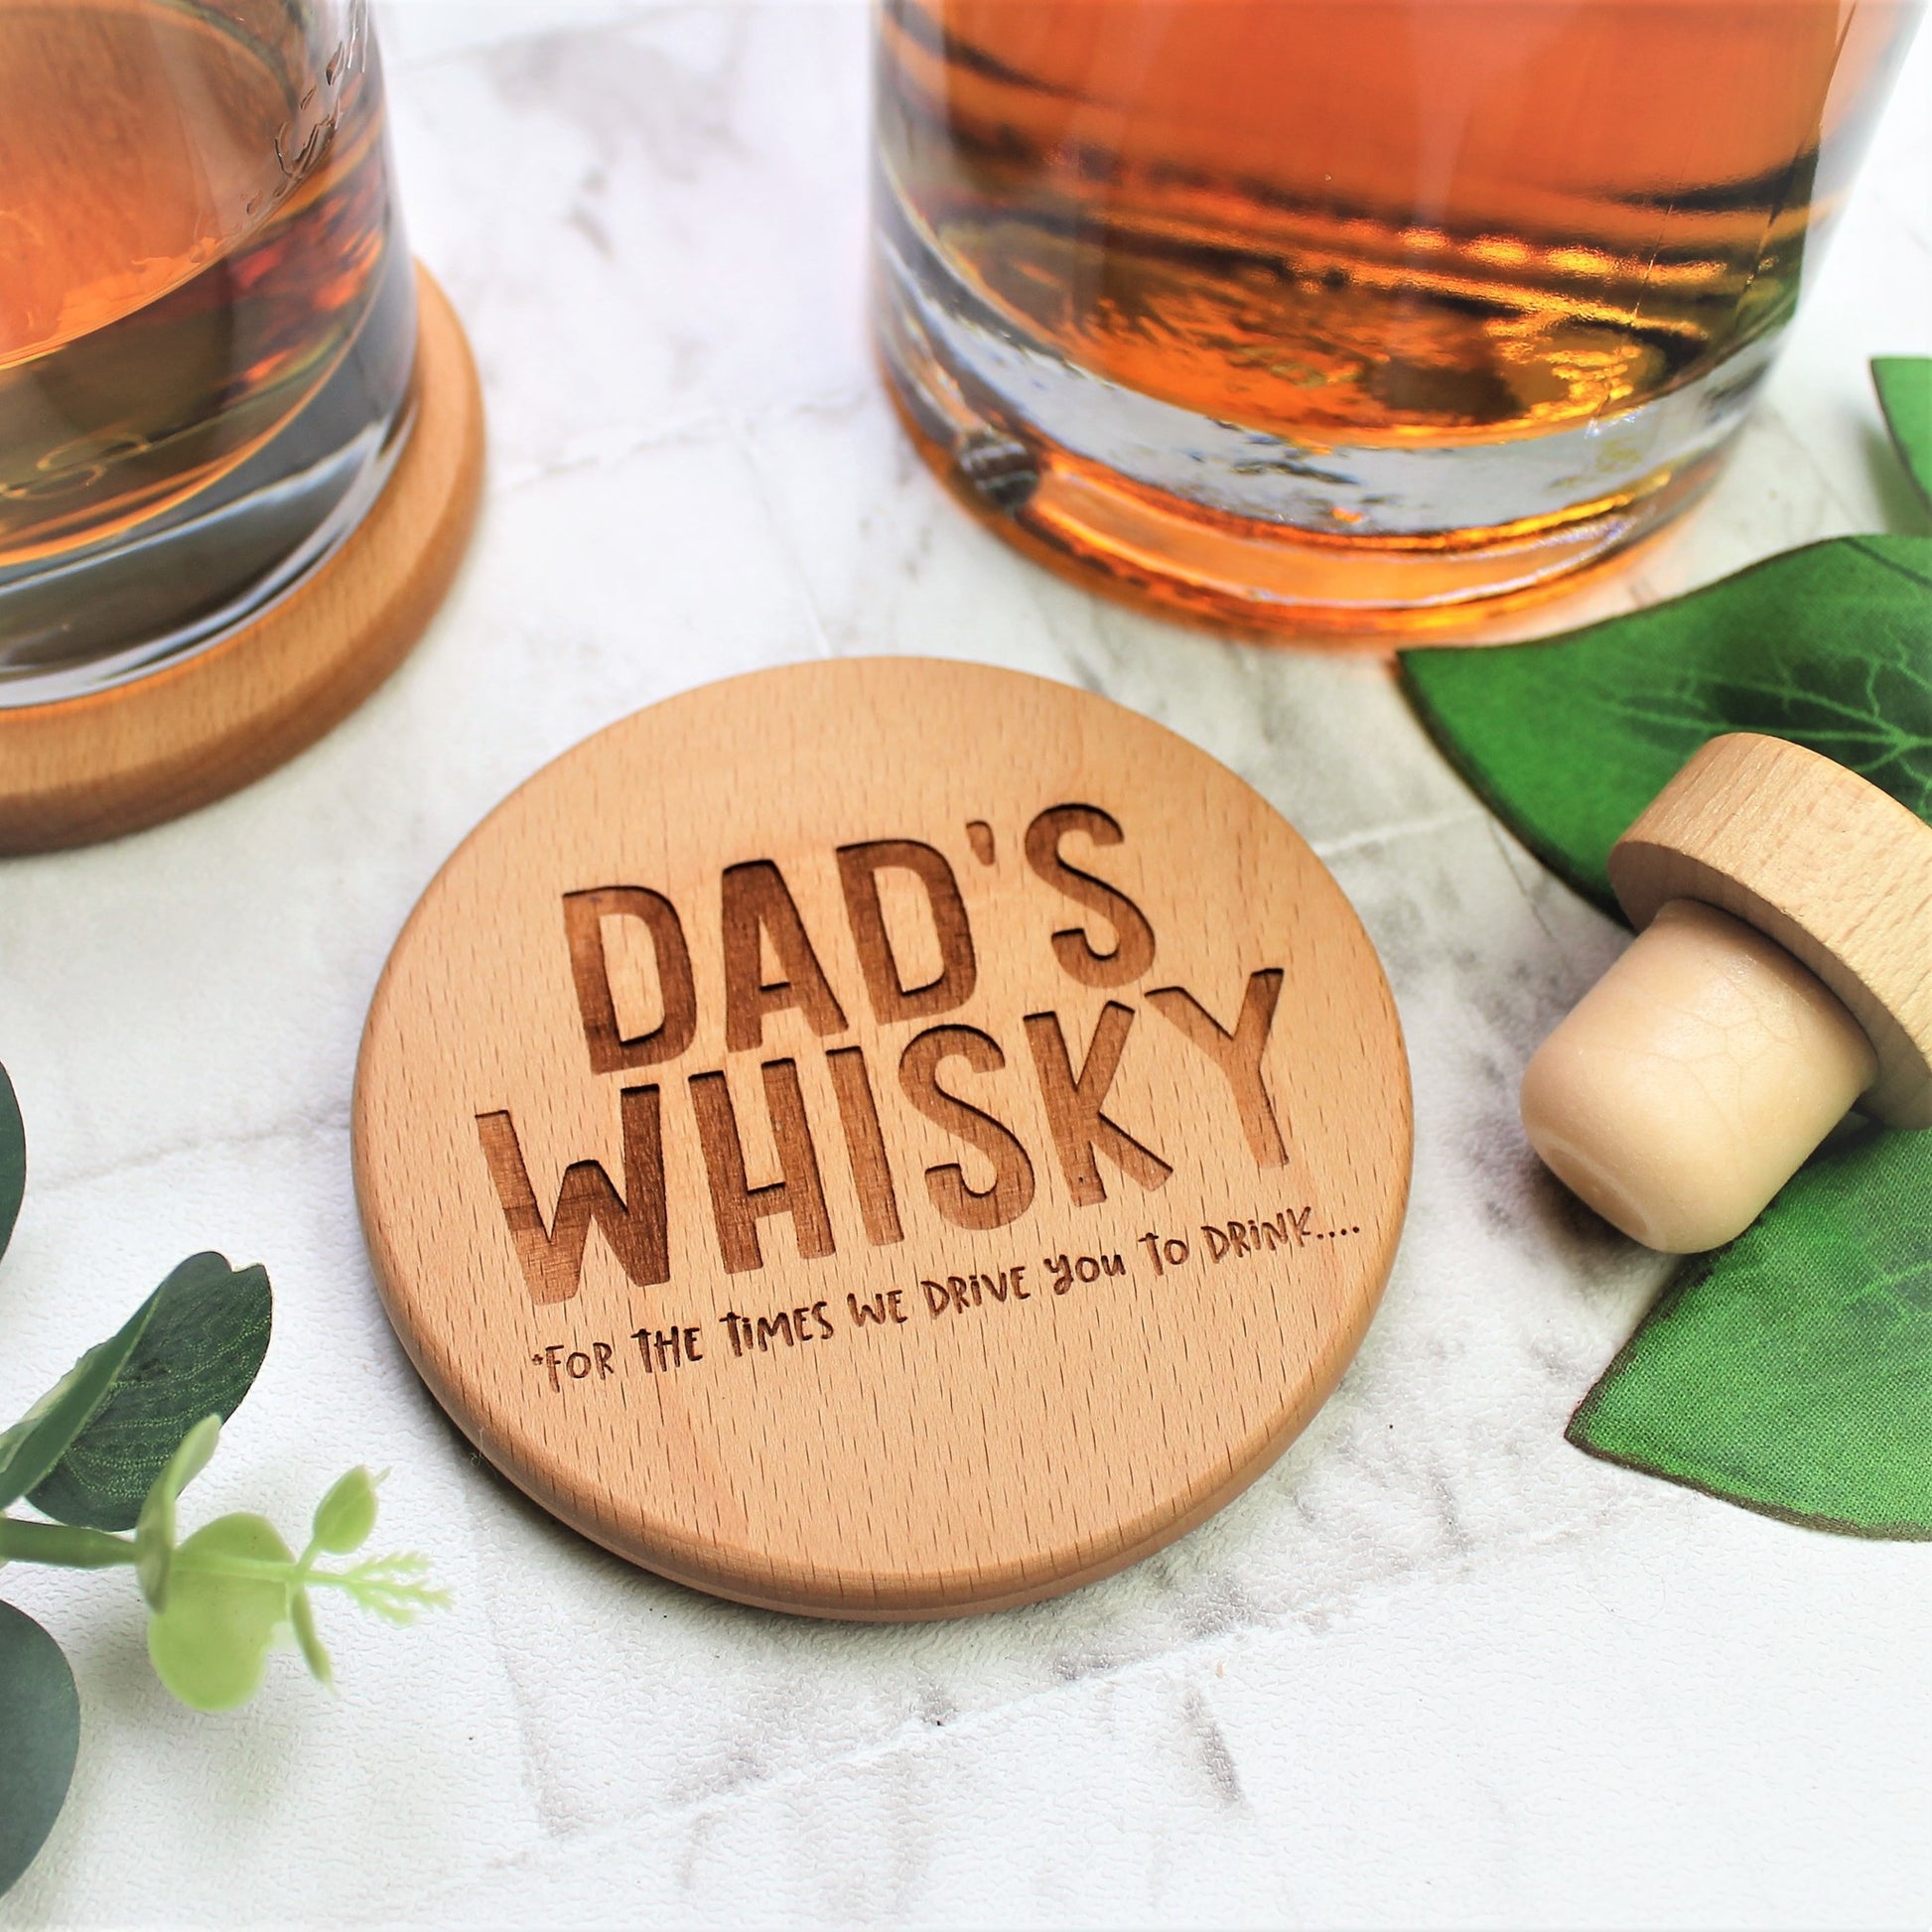 Dad's Whisky round wooden coaster engraved for him